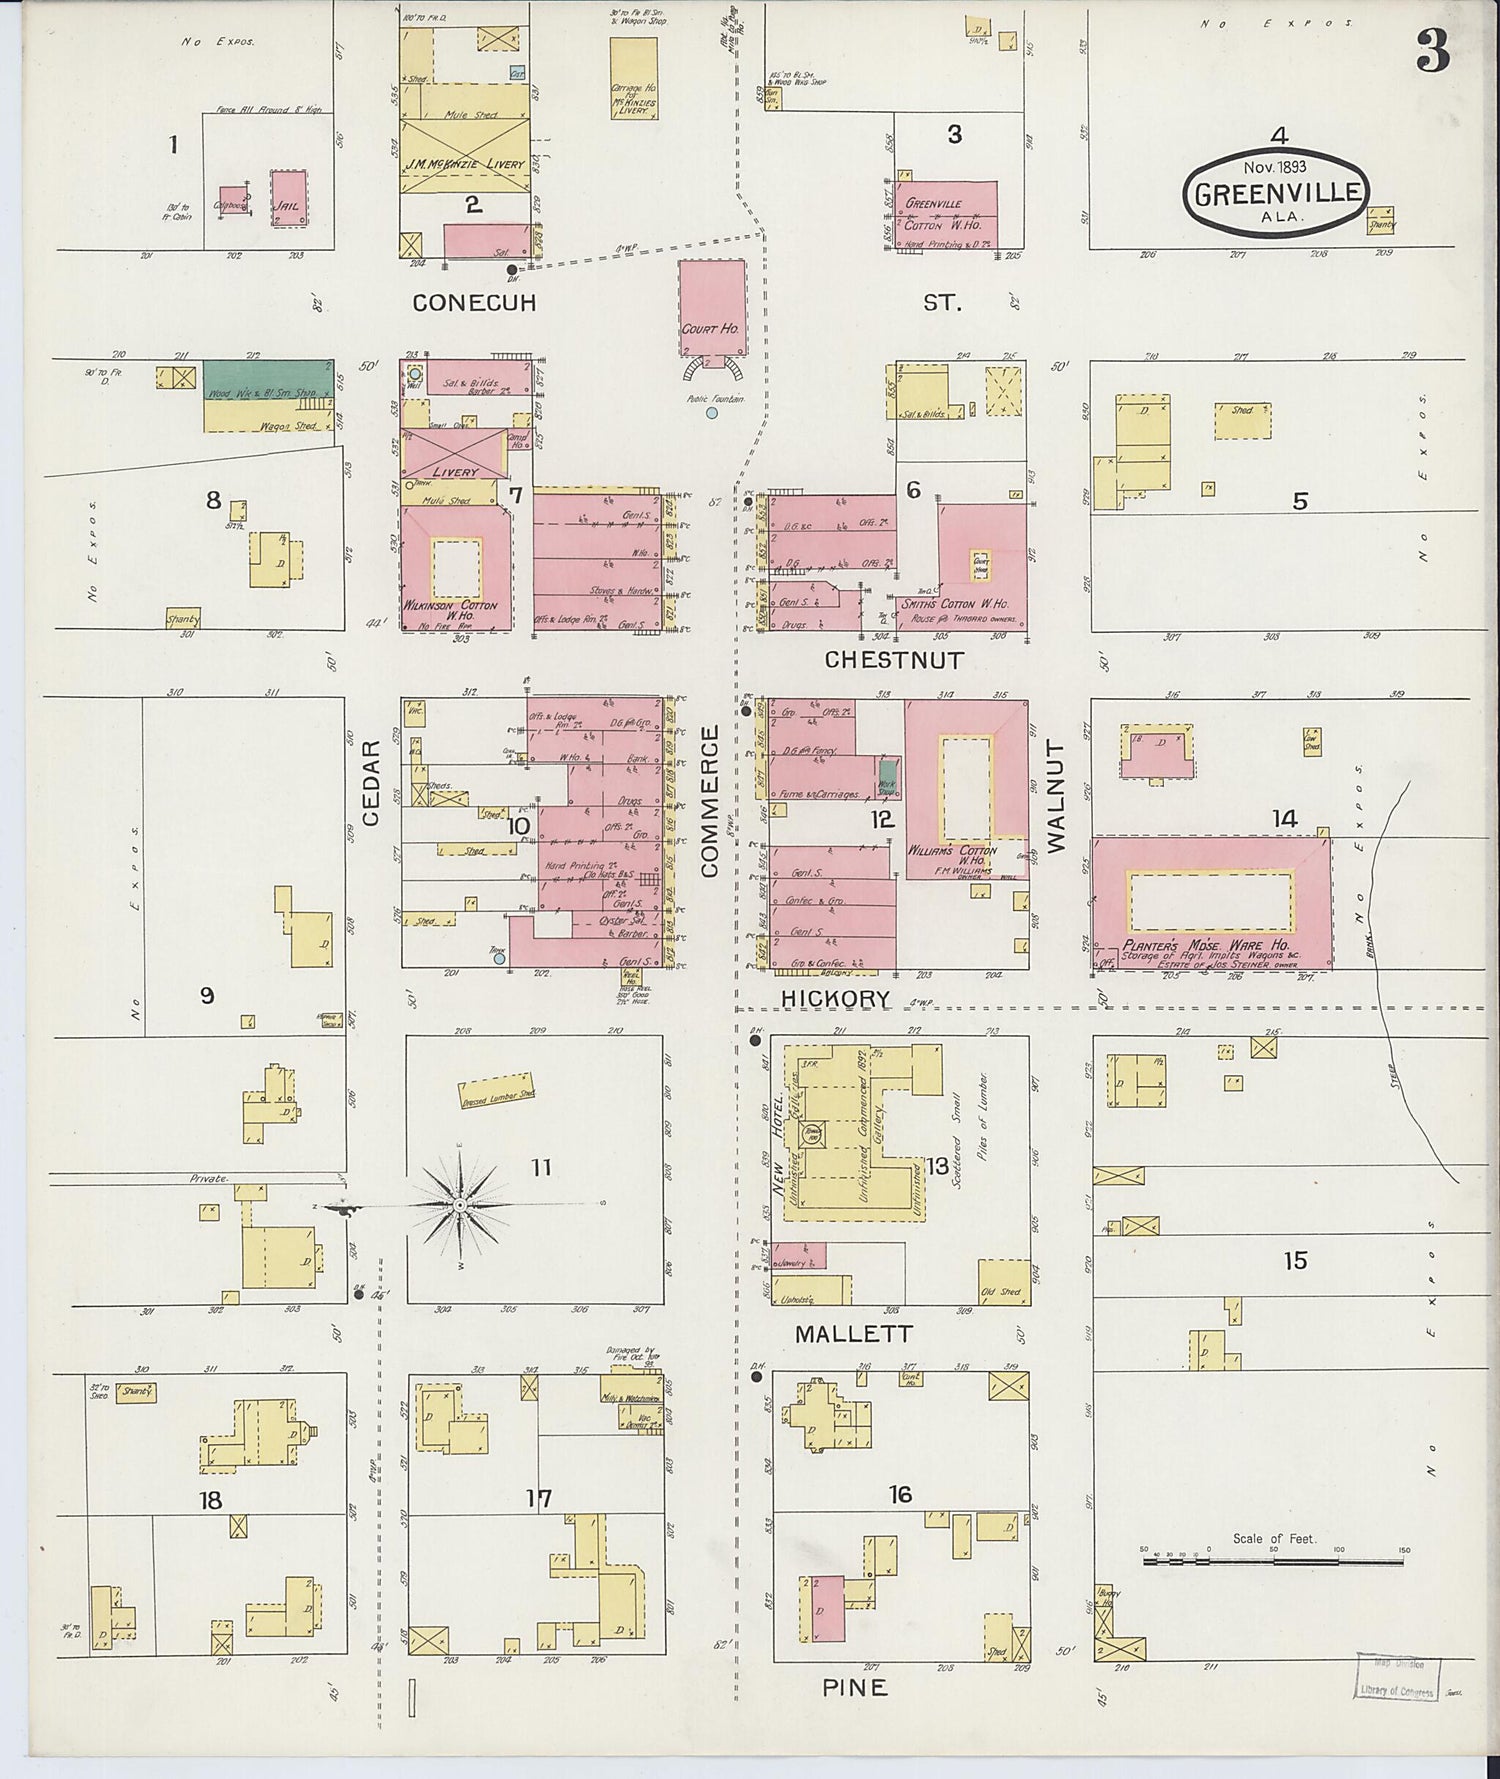 This old map of Greenville, Butler County, Alabama was created by Sanborn Map Company in 1893